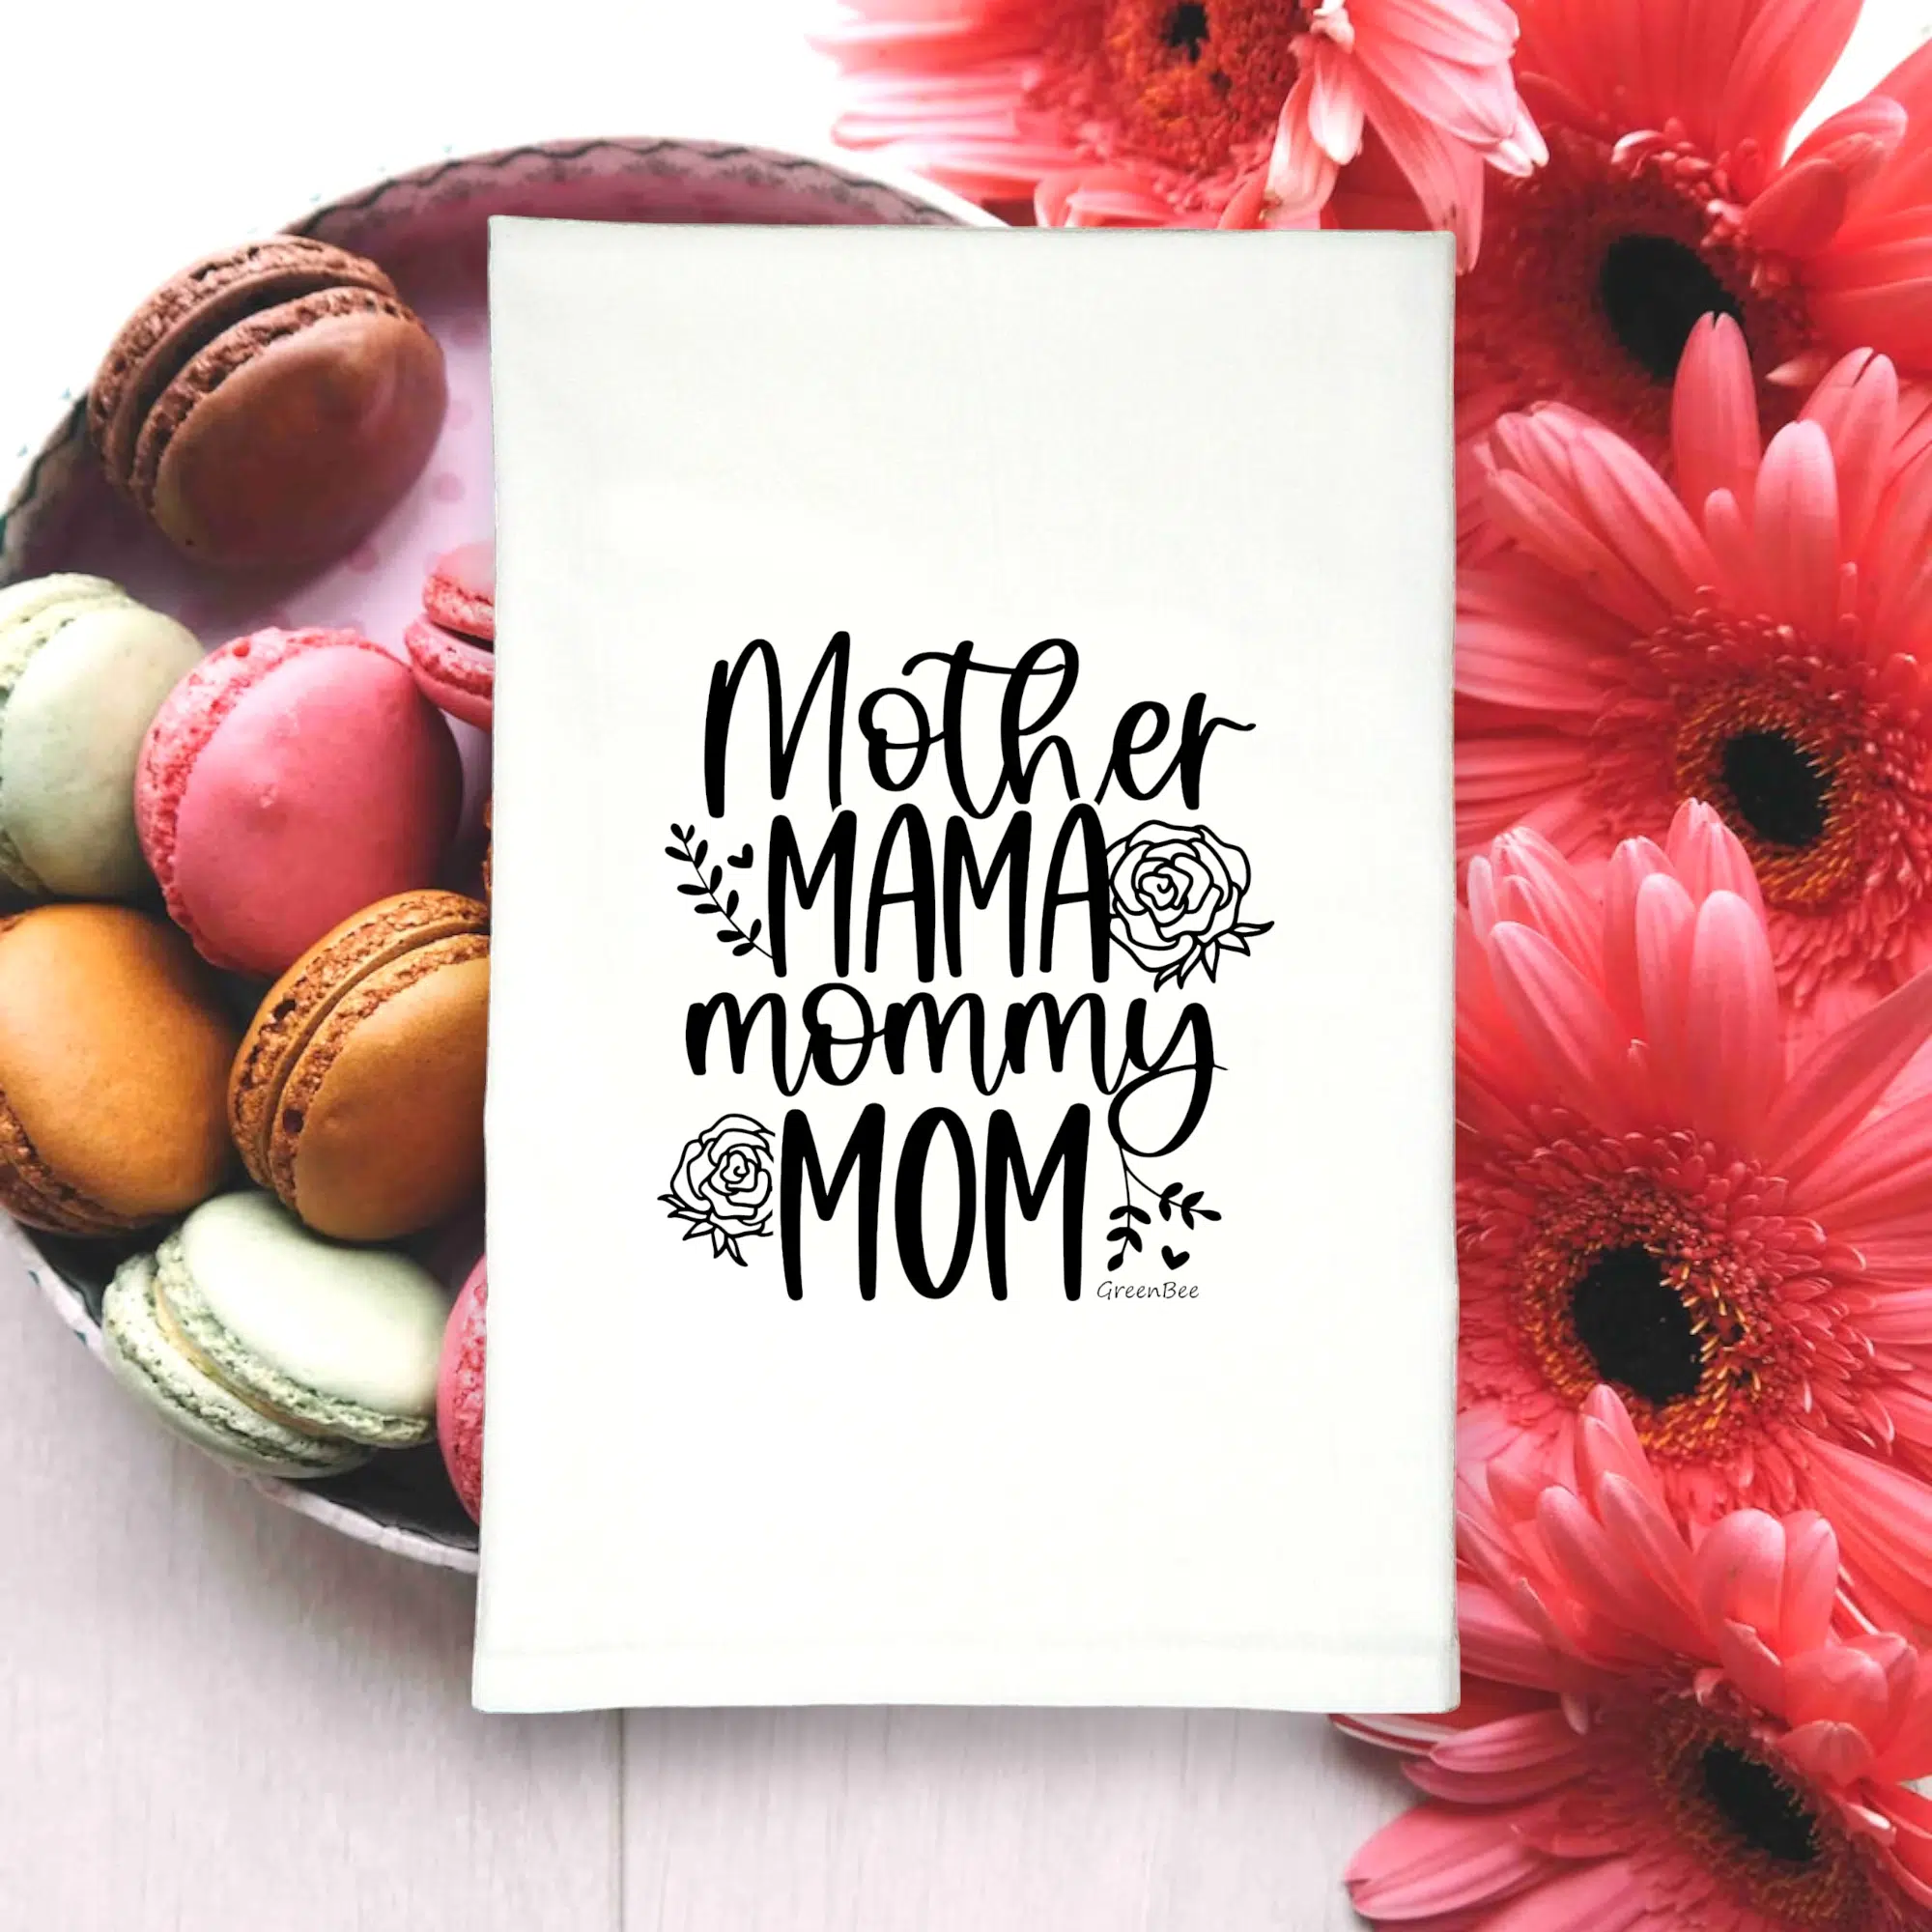 mother mama mommy mom Kitchen tea towel